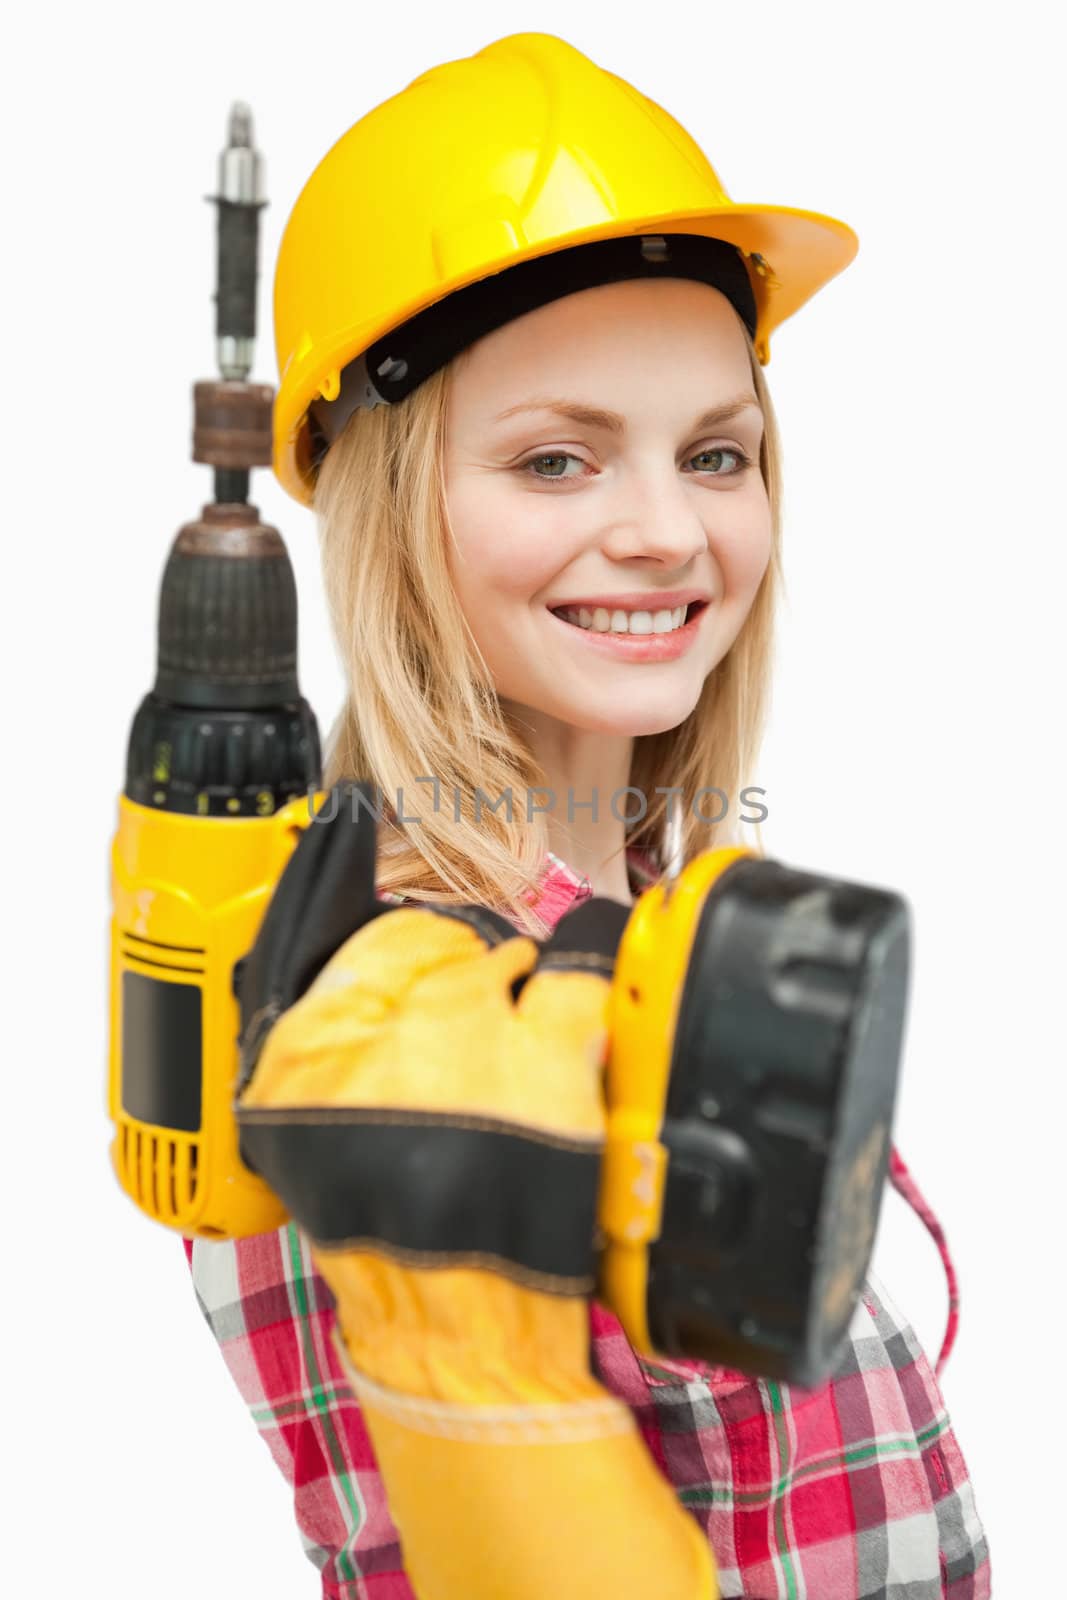 Smiling woman holding an electric screwdriver against white background